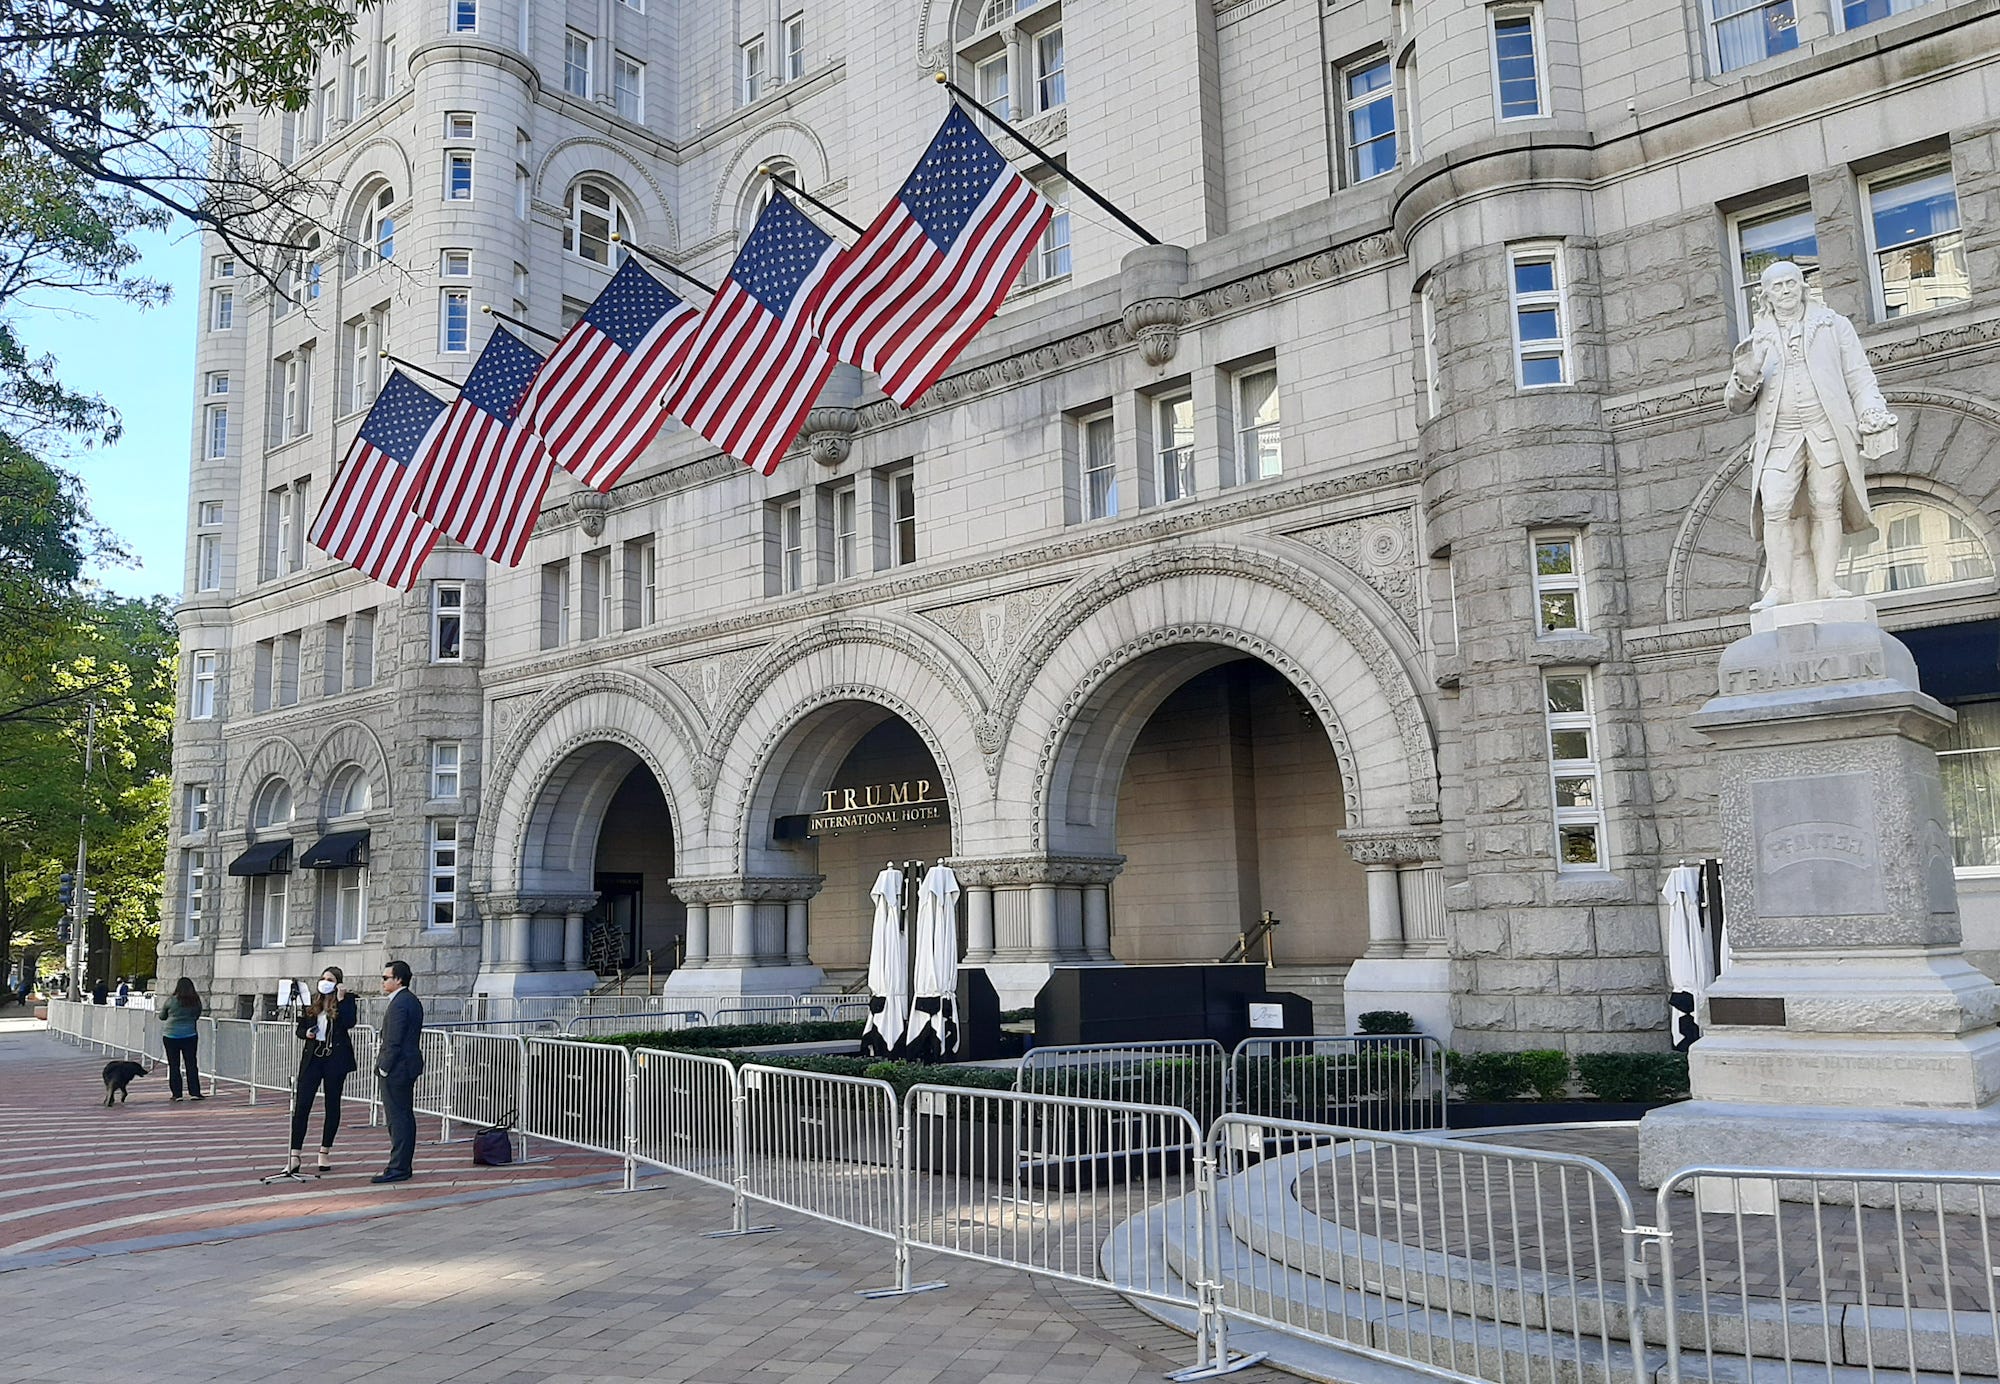 Exclusion Every year Predict A Trump hotel in DC more than quadrupled prices for room bookings around  Biden's inauguration